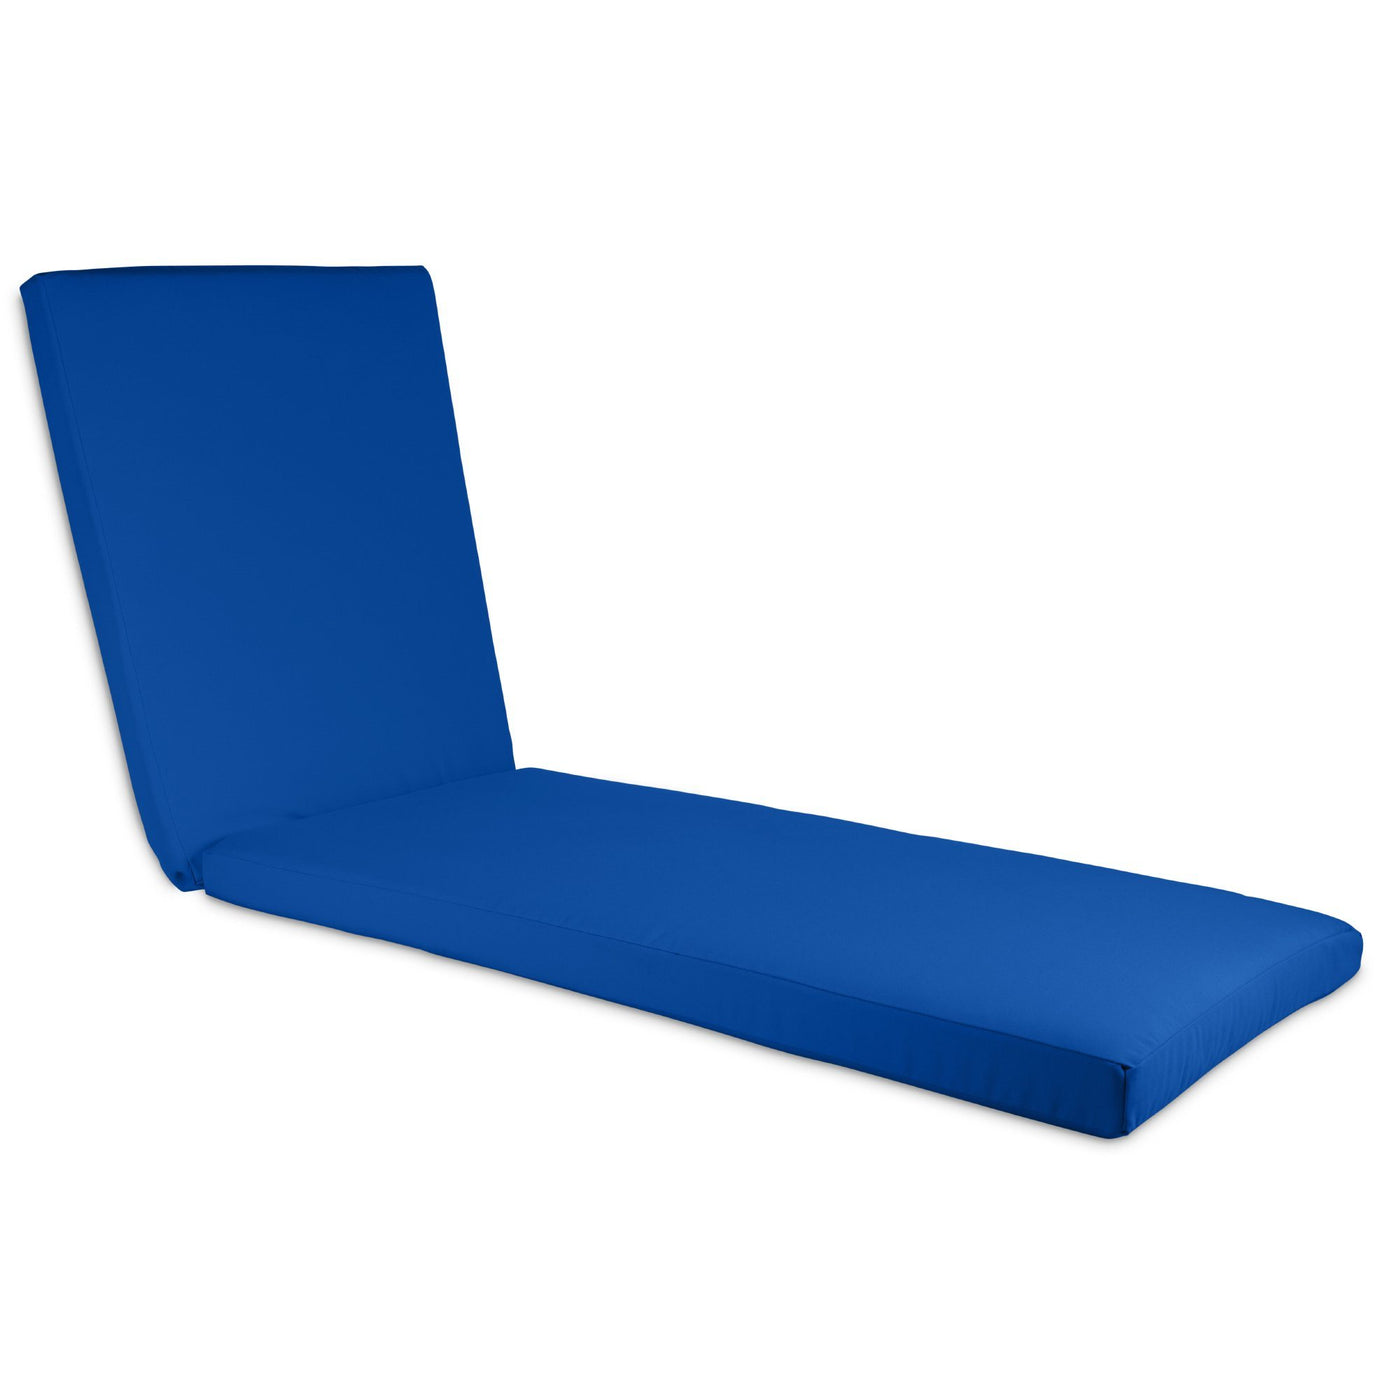 CLOSEOUT Chaise Lounge 77 x 24 x 3 Water Resistant Outdoor Hinged Cushion Highwood USA Cobalt Blue 